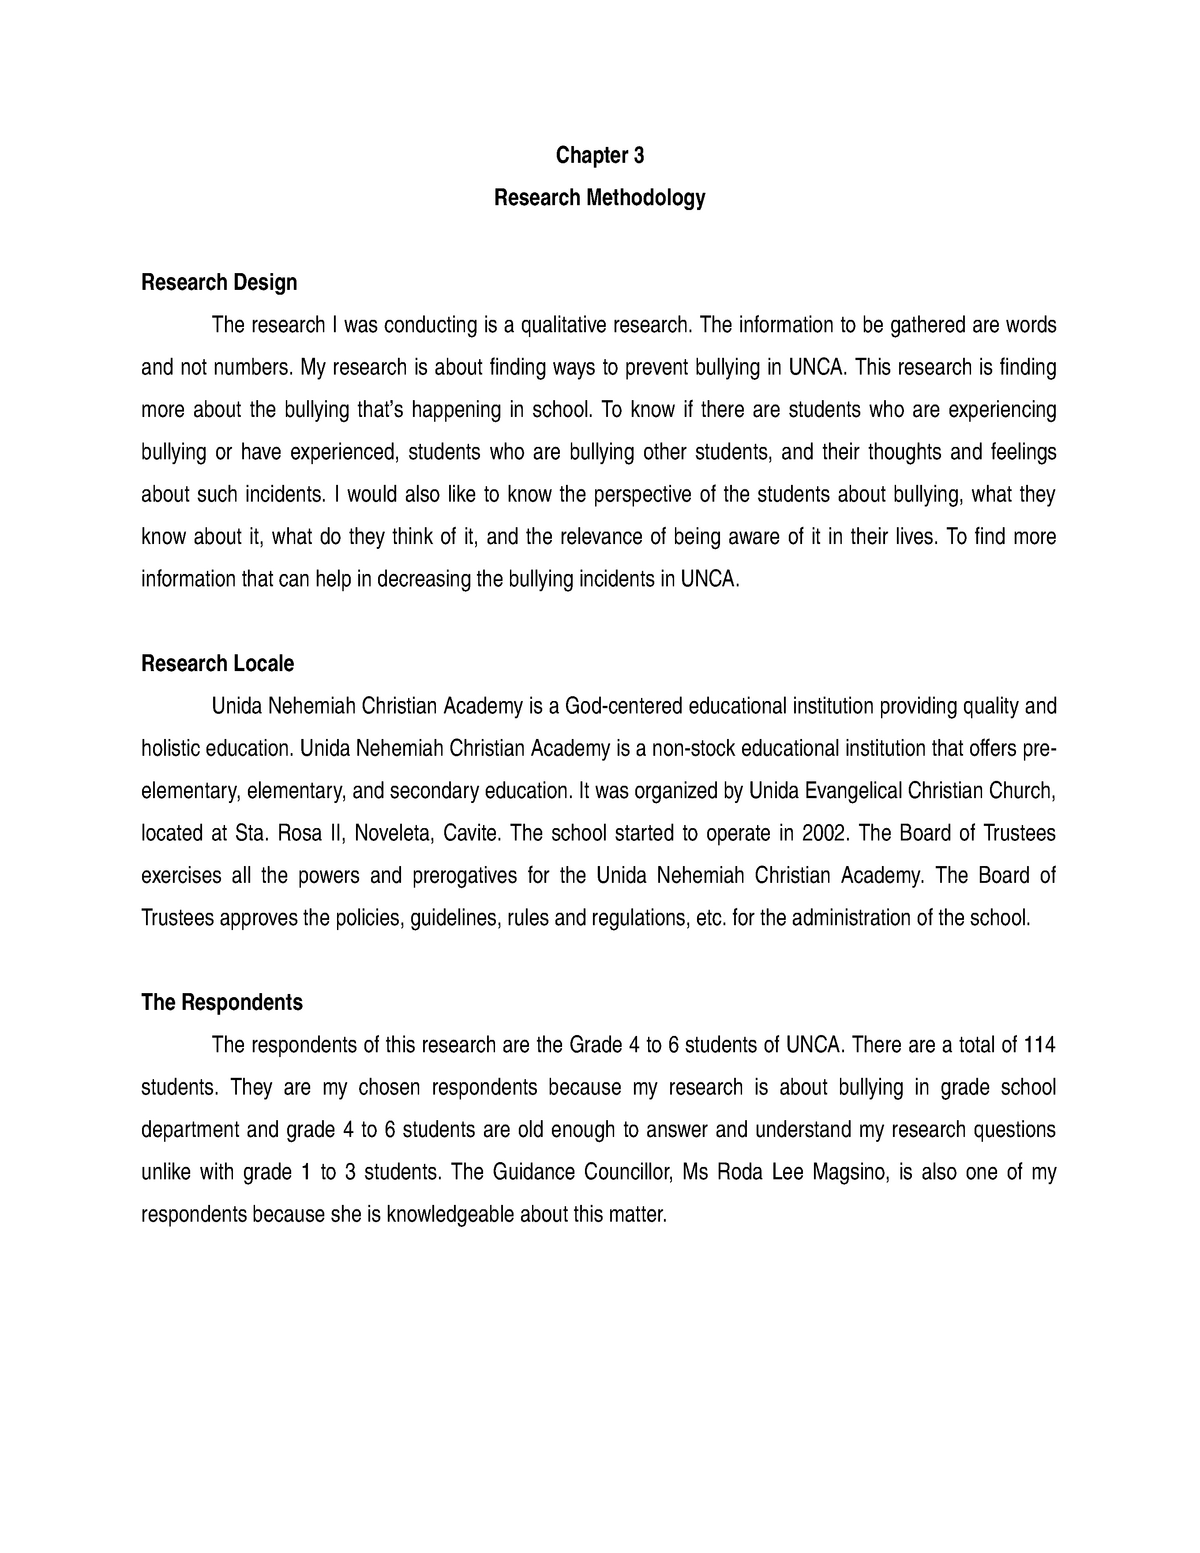 types of bullying research paper